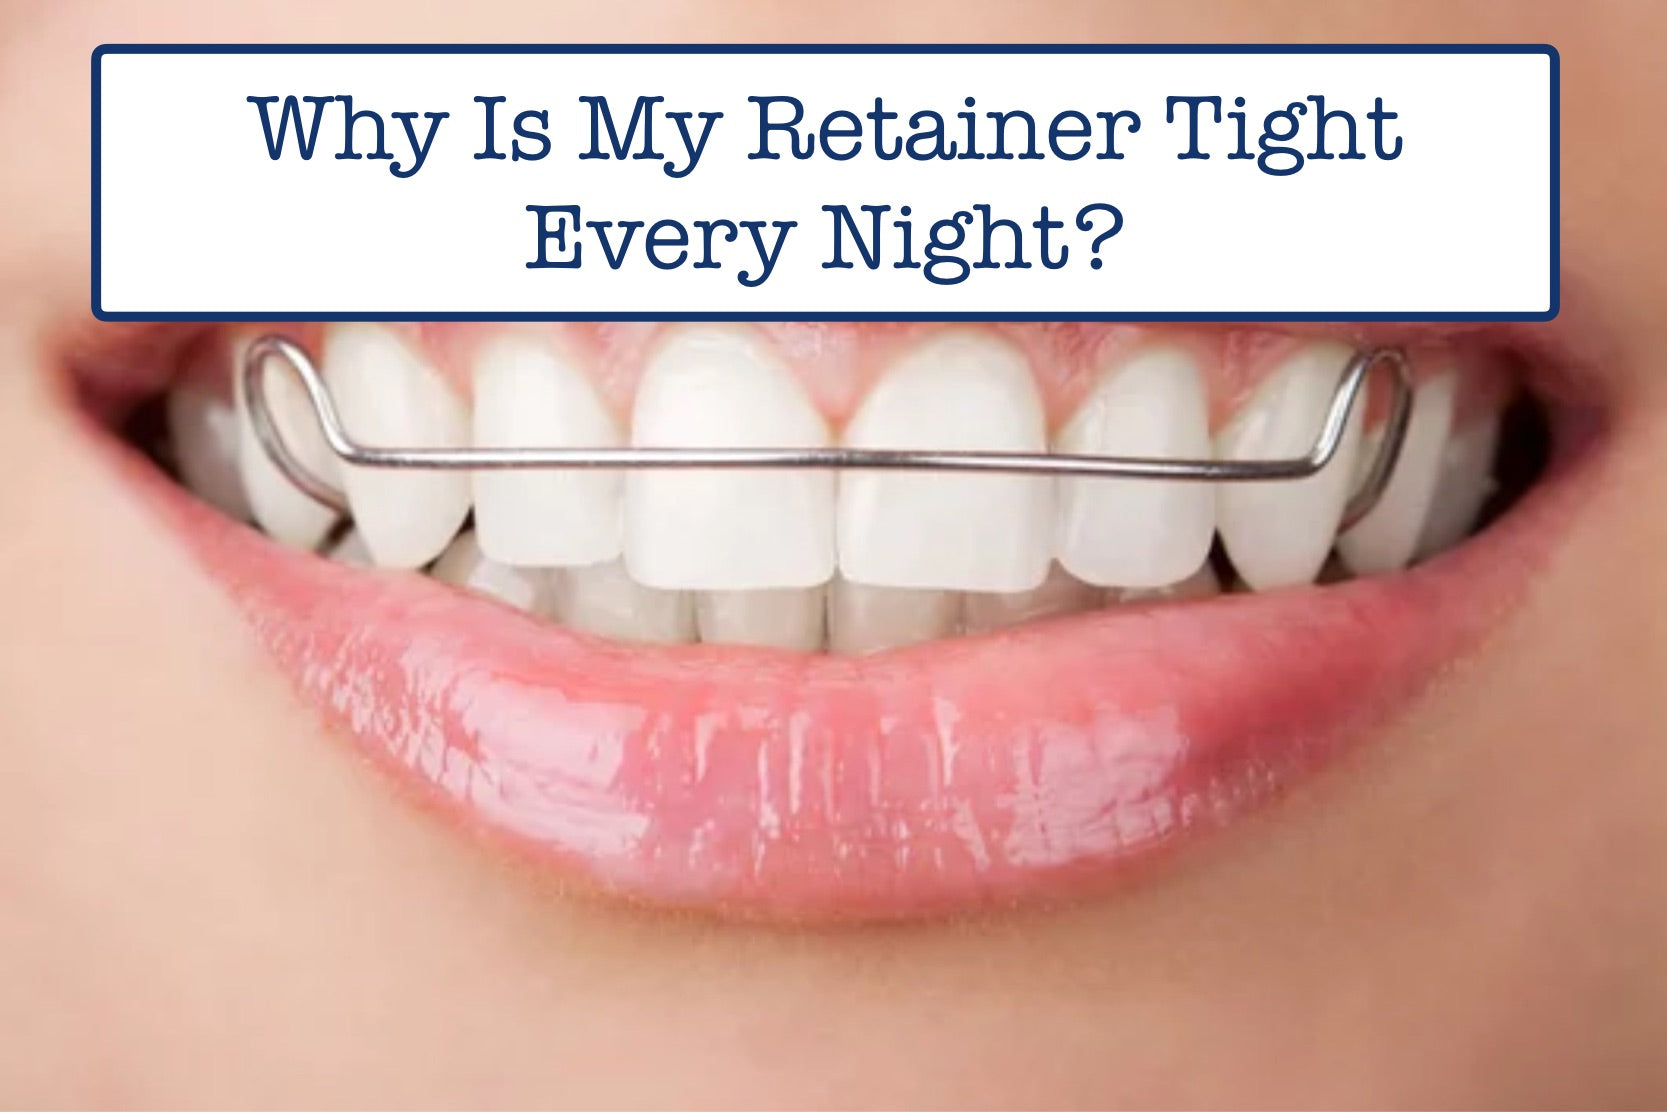 Can I Wear My Retainer During The Day Instead Of At Night?